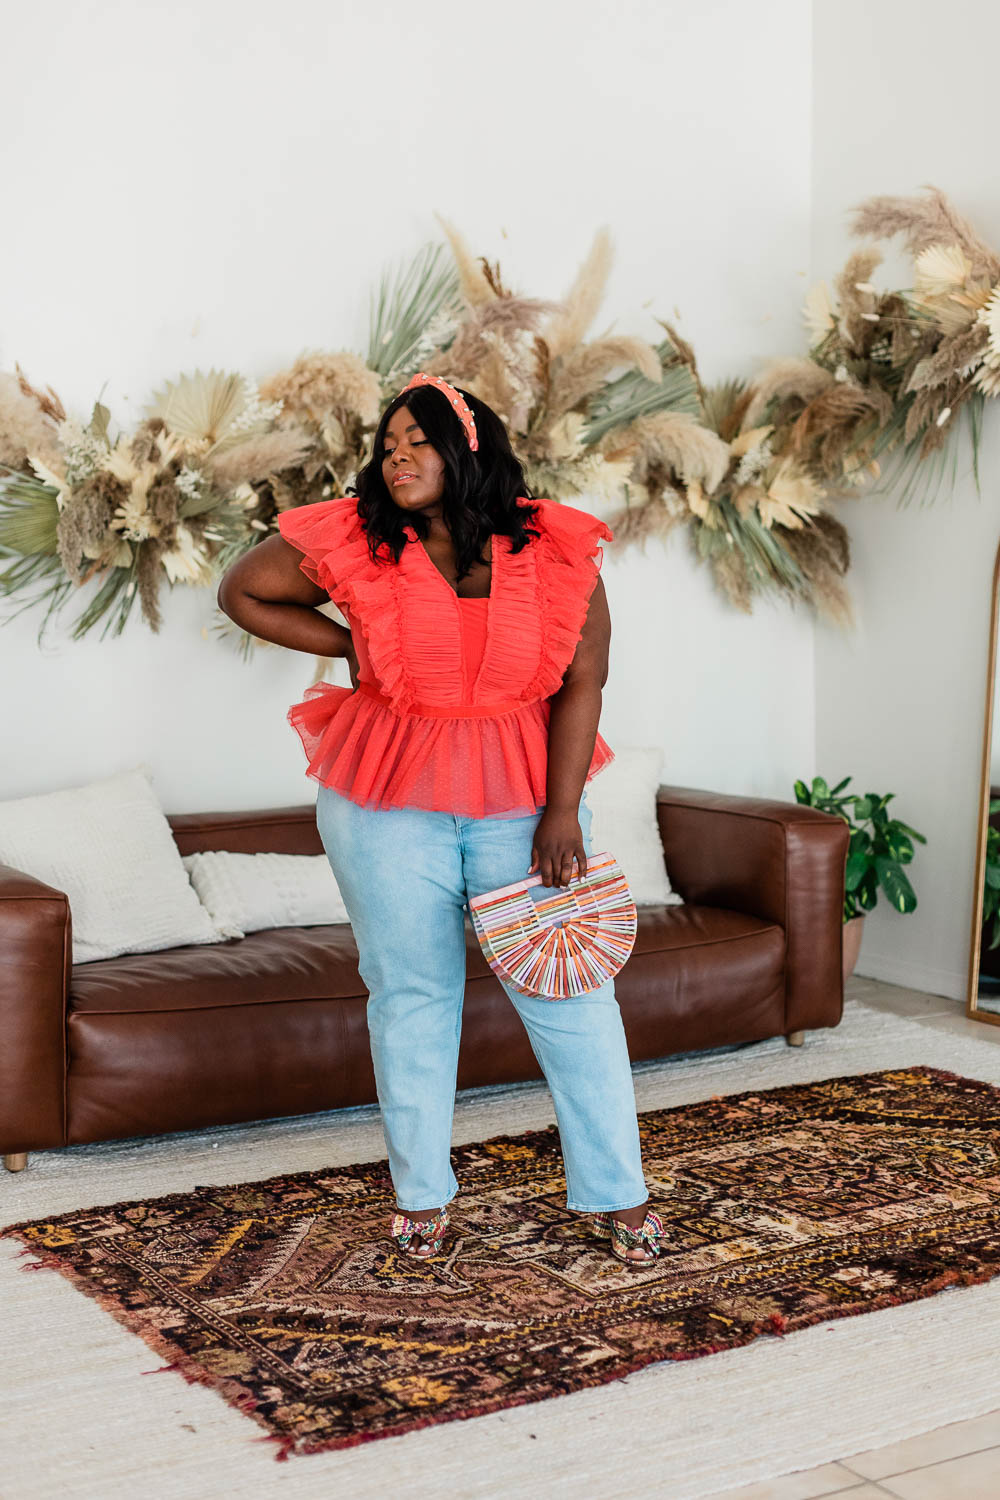 Anthropologie Pleated Tulle Blouse, Forever 21 Plus Size Straight Leg Jeans, Loeffler Randall Penny Bow Mules, Anthropologie Embellished Twist Knot Headband, Thamarr Musings of a Curvy Lady 